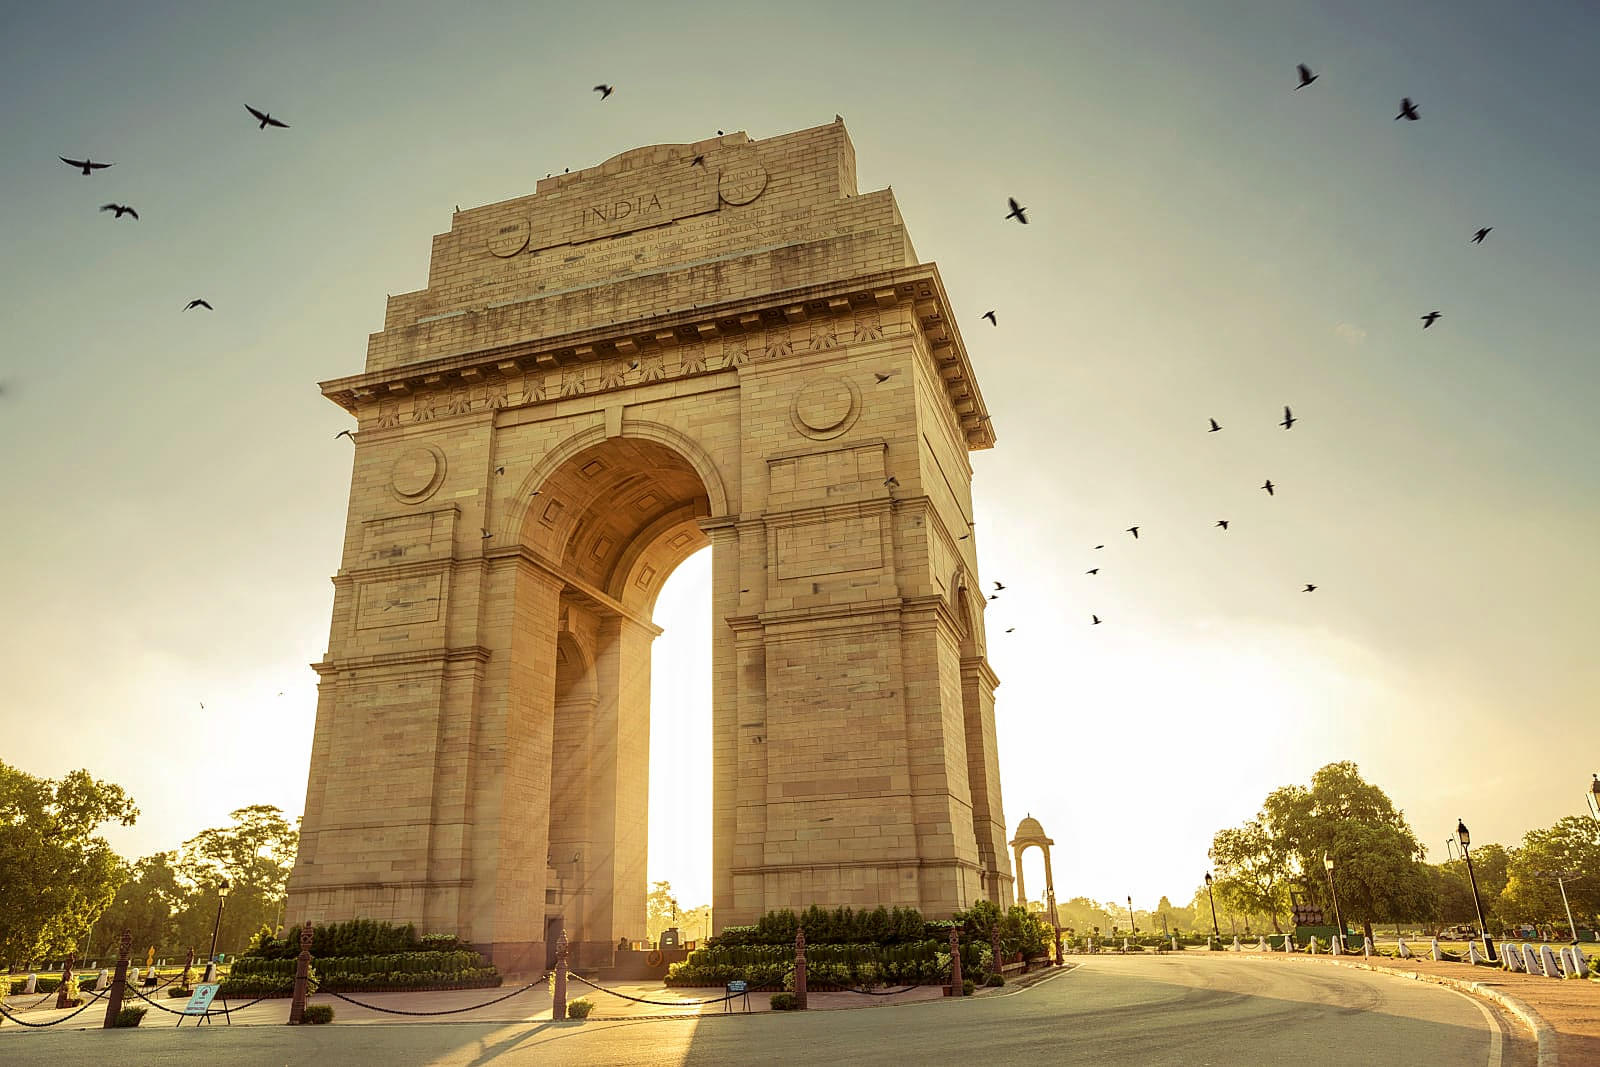 India Gate Overview